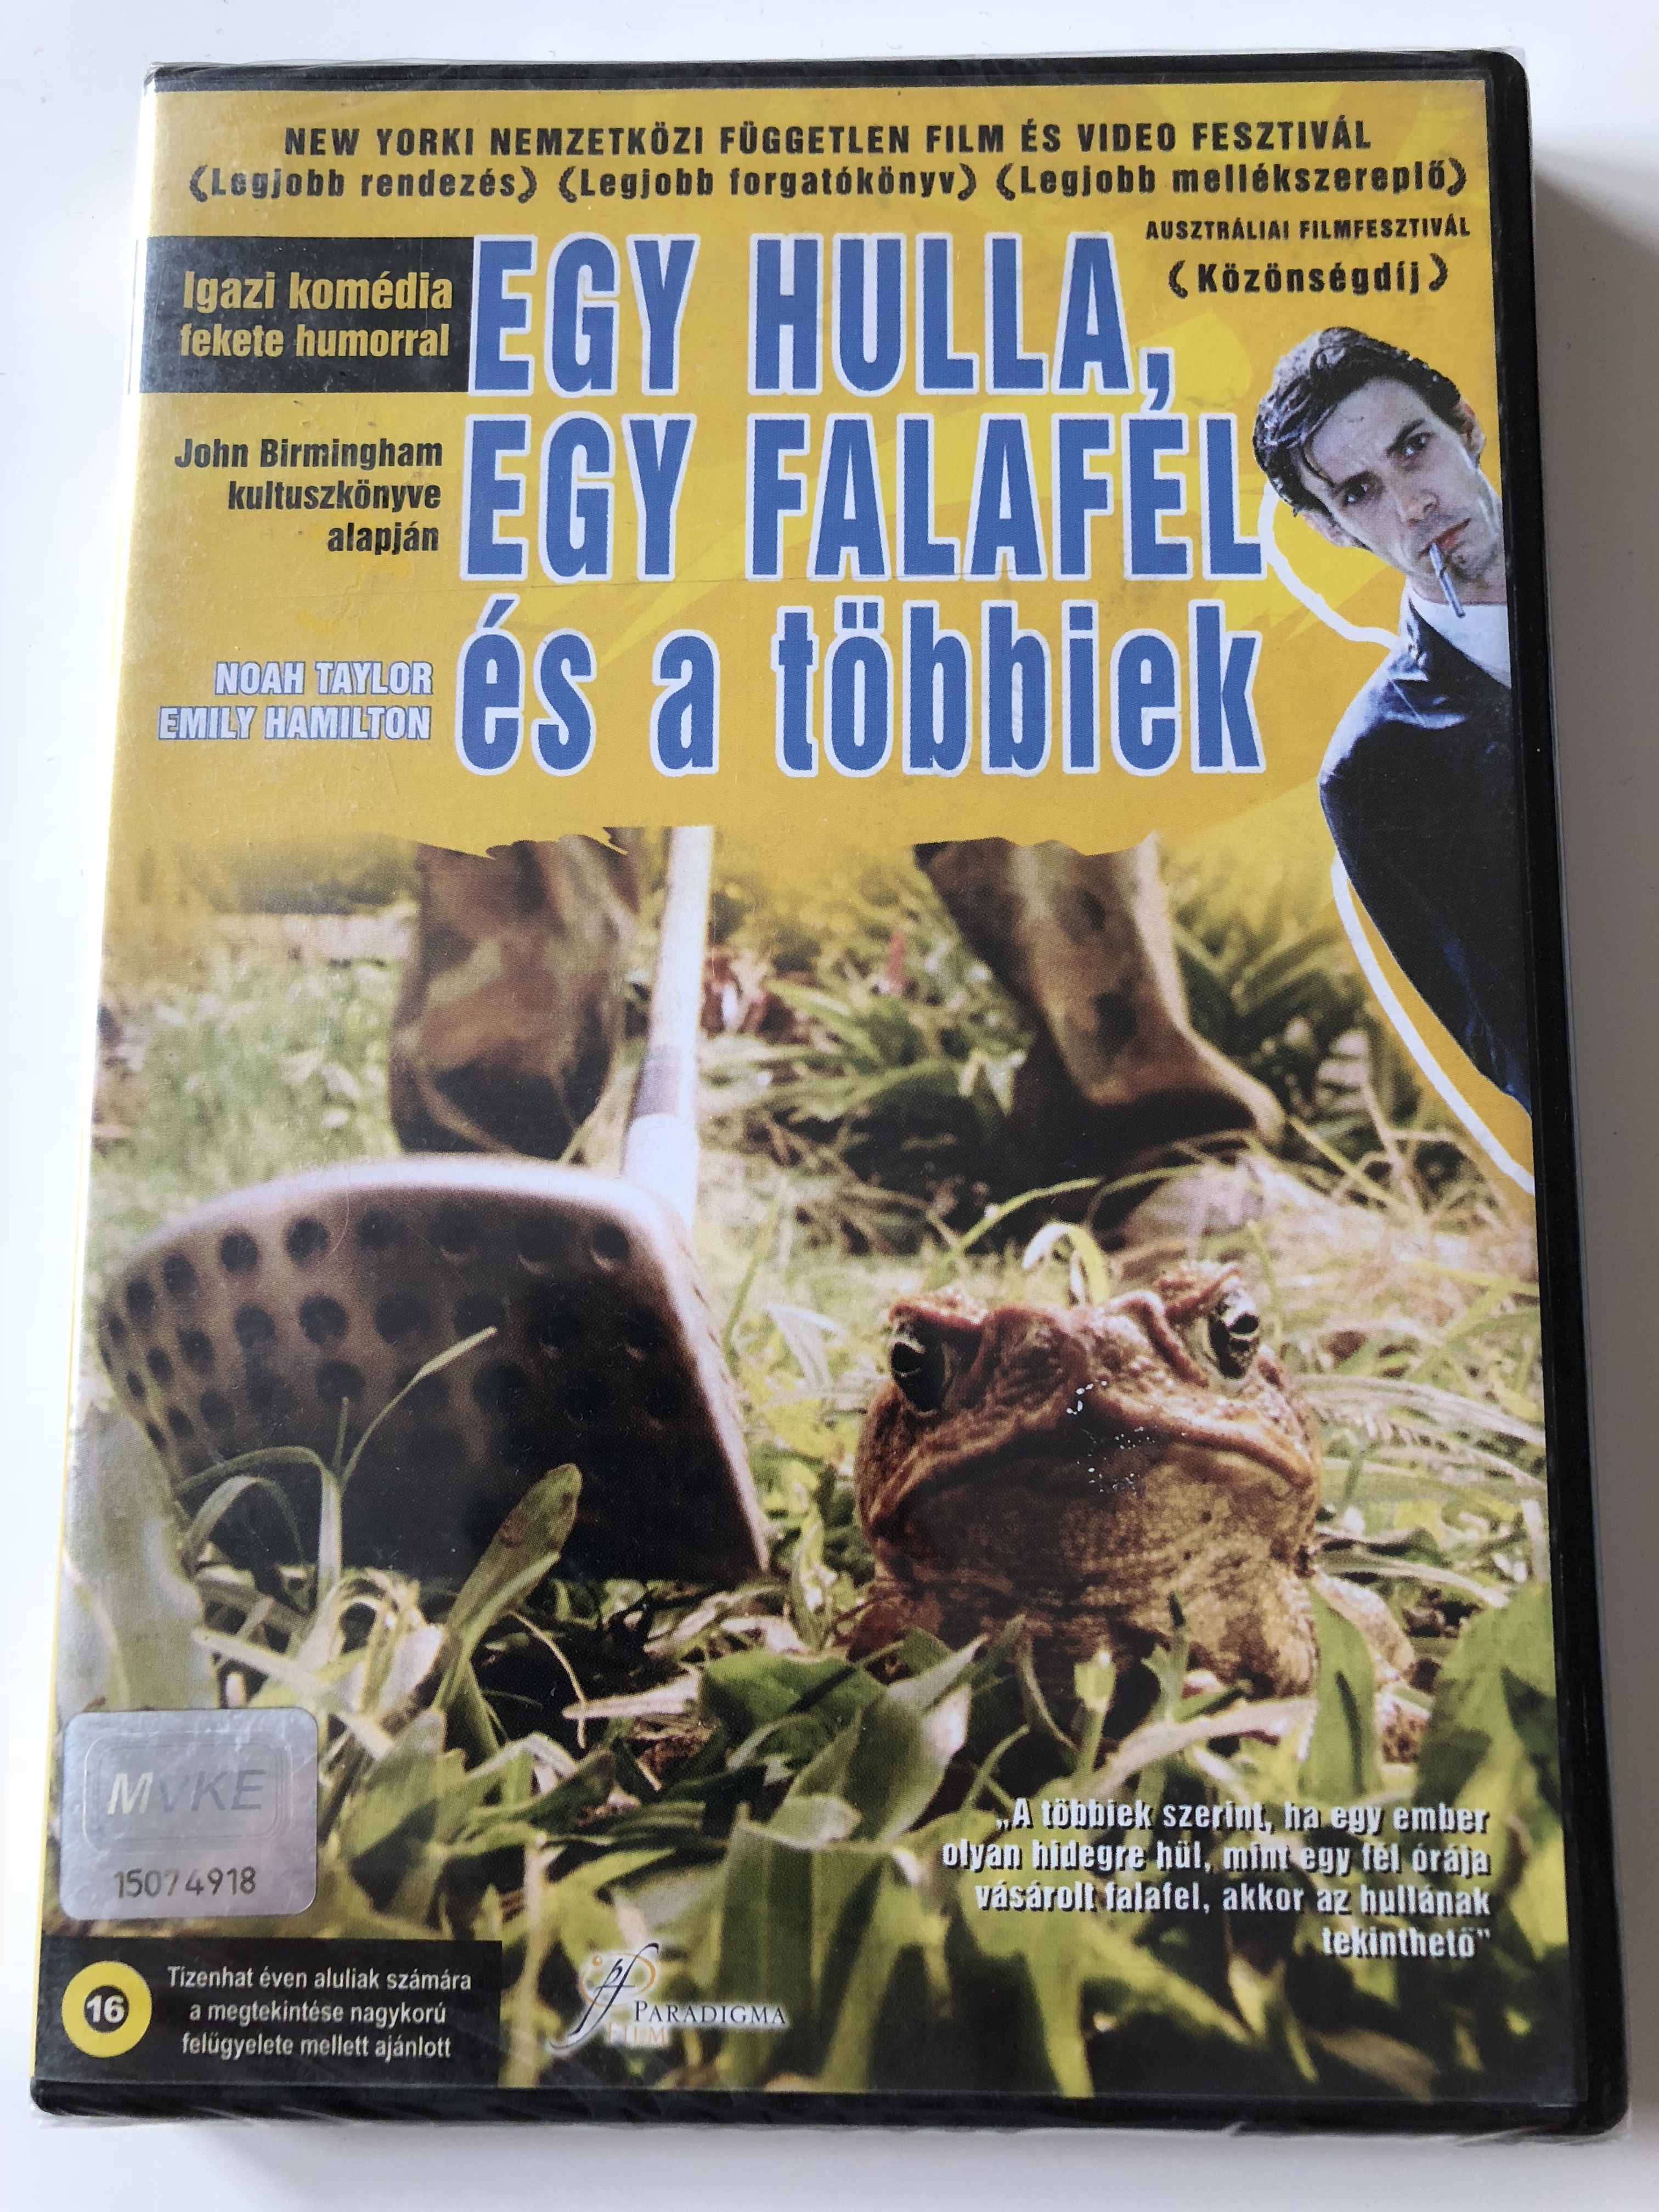 he-died-with-a-felafel-in-his-hand-dvd-2001-egy-hulla-egy-falafel-s-a-t-bbiek...-directed-by-richard-lowenstein-starring-noah-taylor-emily-hamilton-sophie-lee-1-.jpg